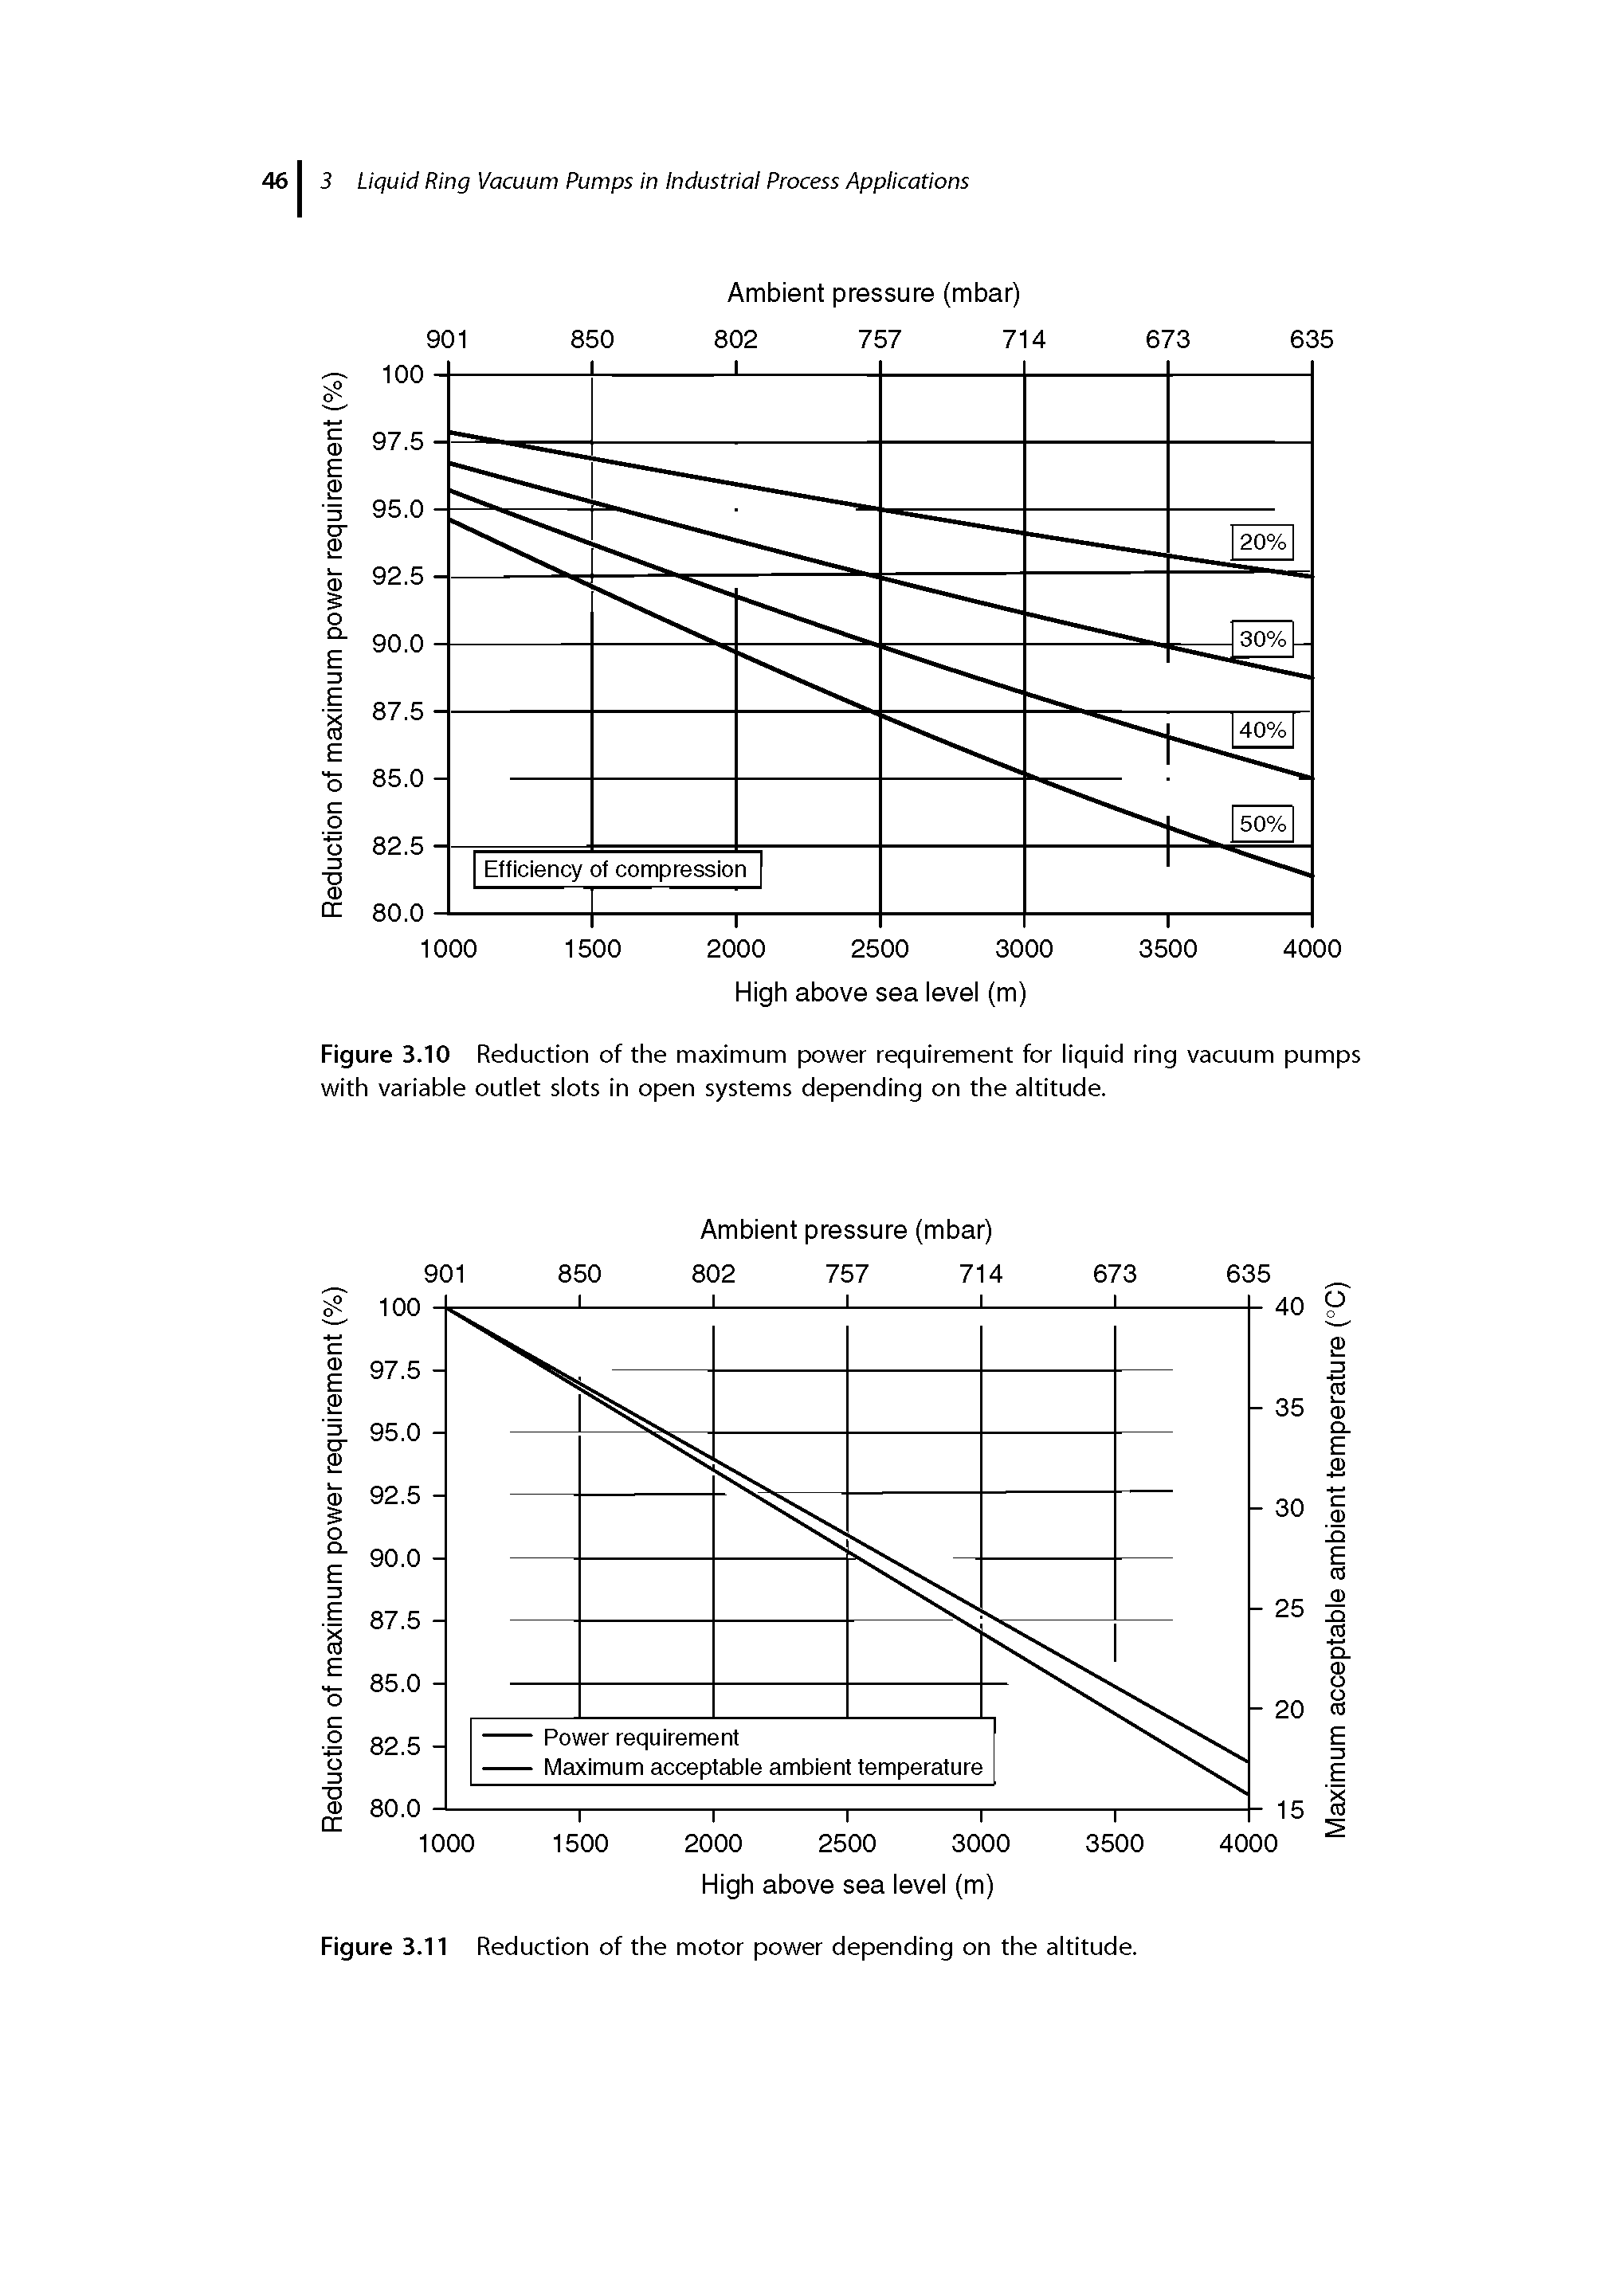 Figure 3.10 Reduction of the maximum power requirement for liquid ring vacuum pumps with variable outlet slots in open systems depending on the altitude.